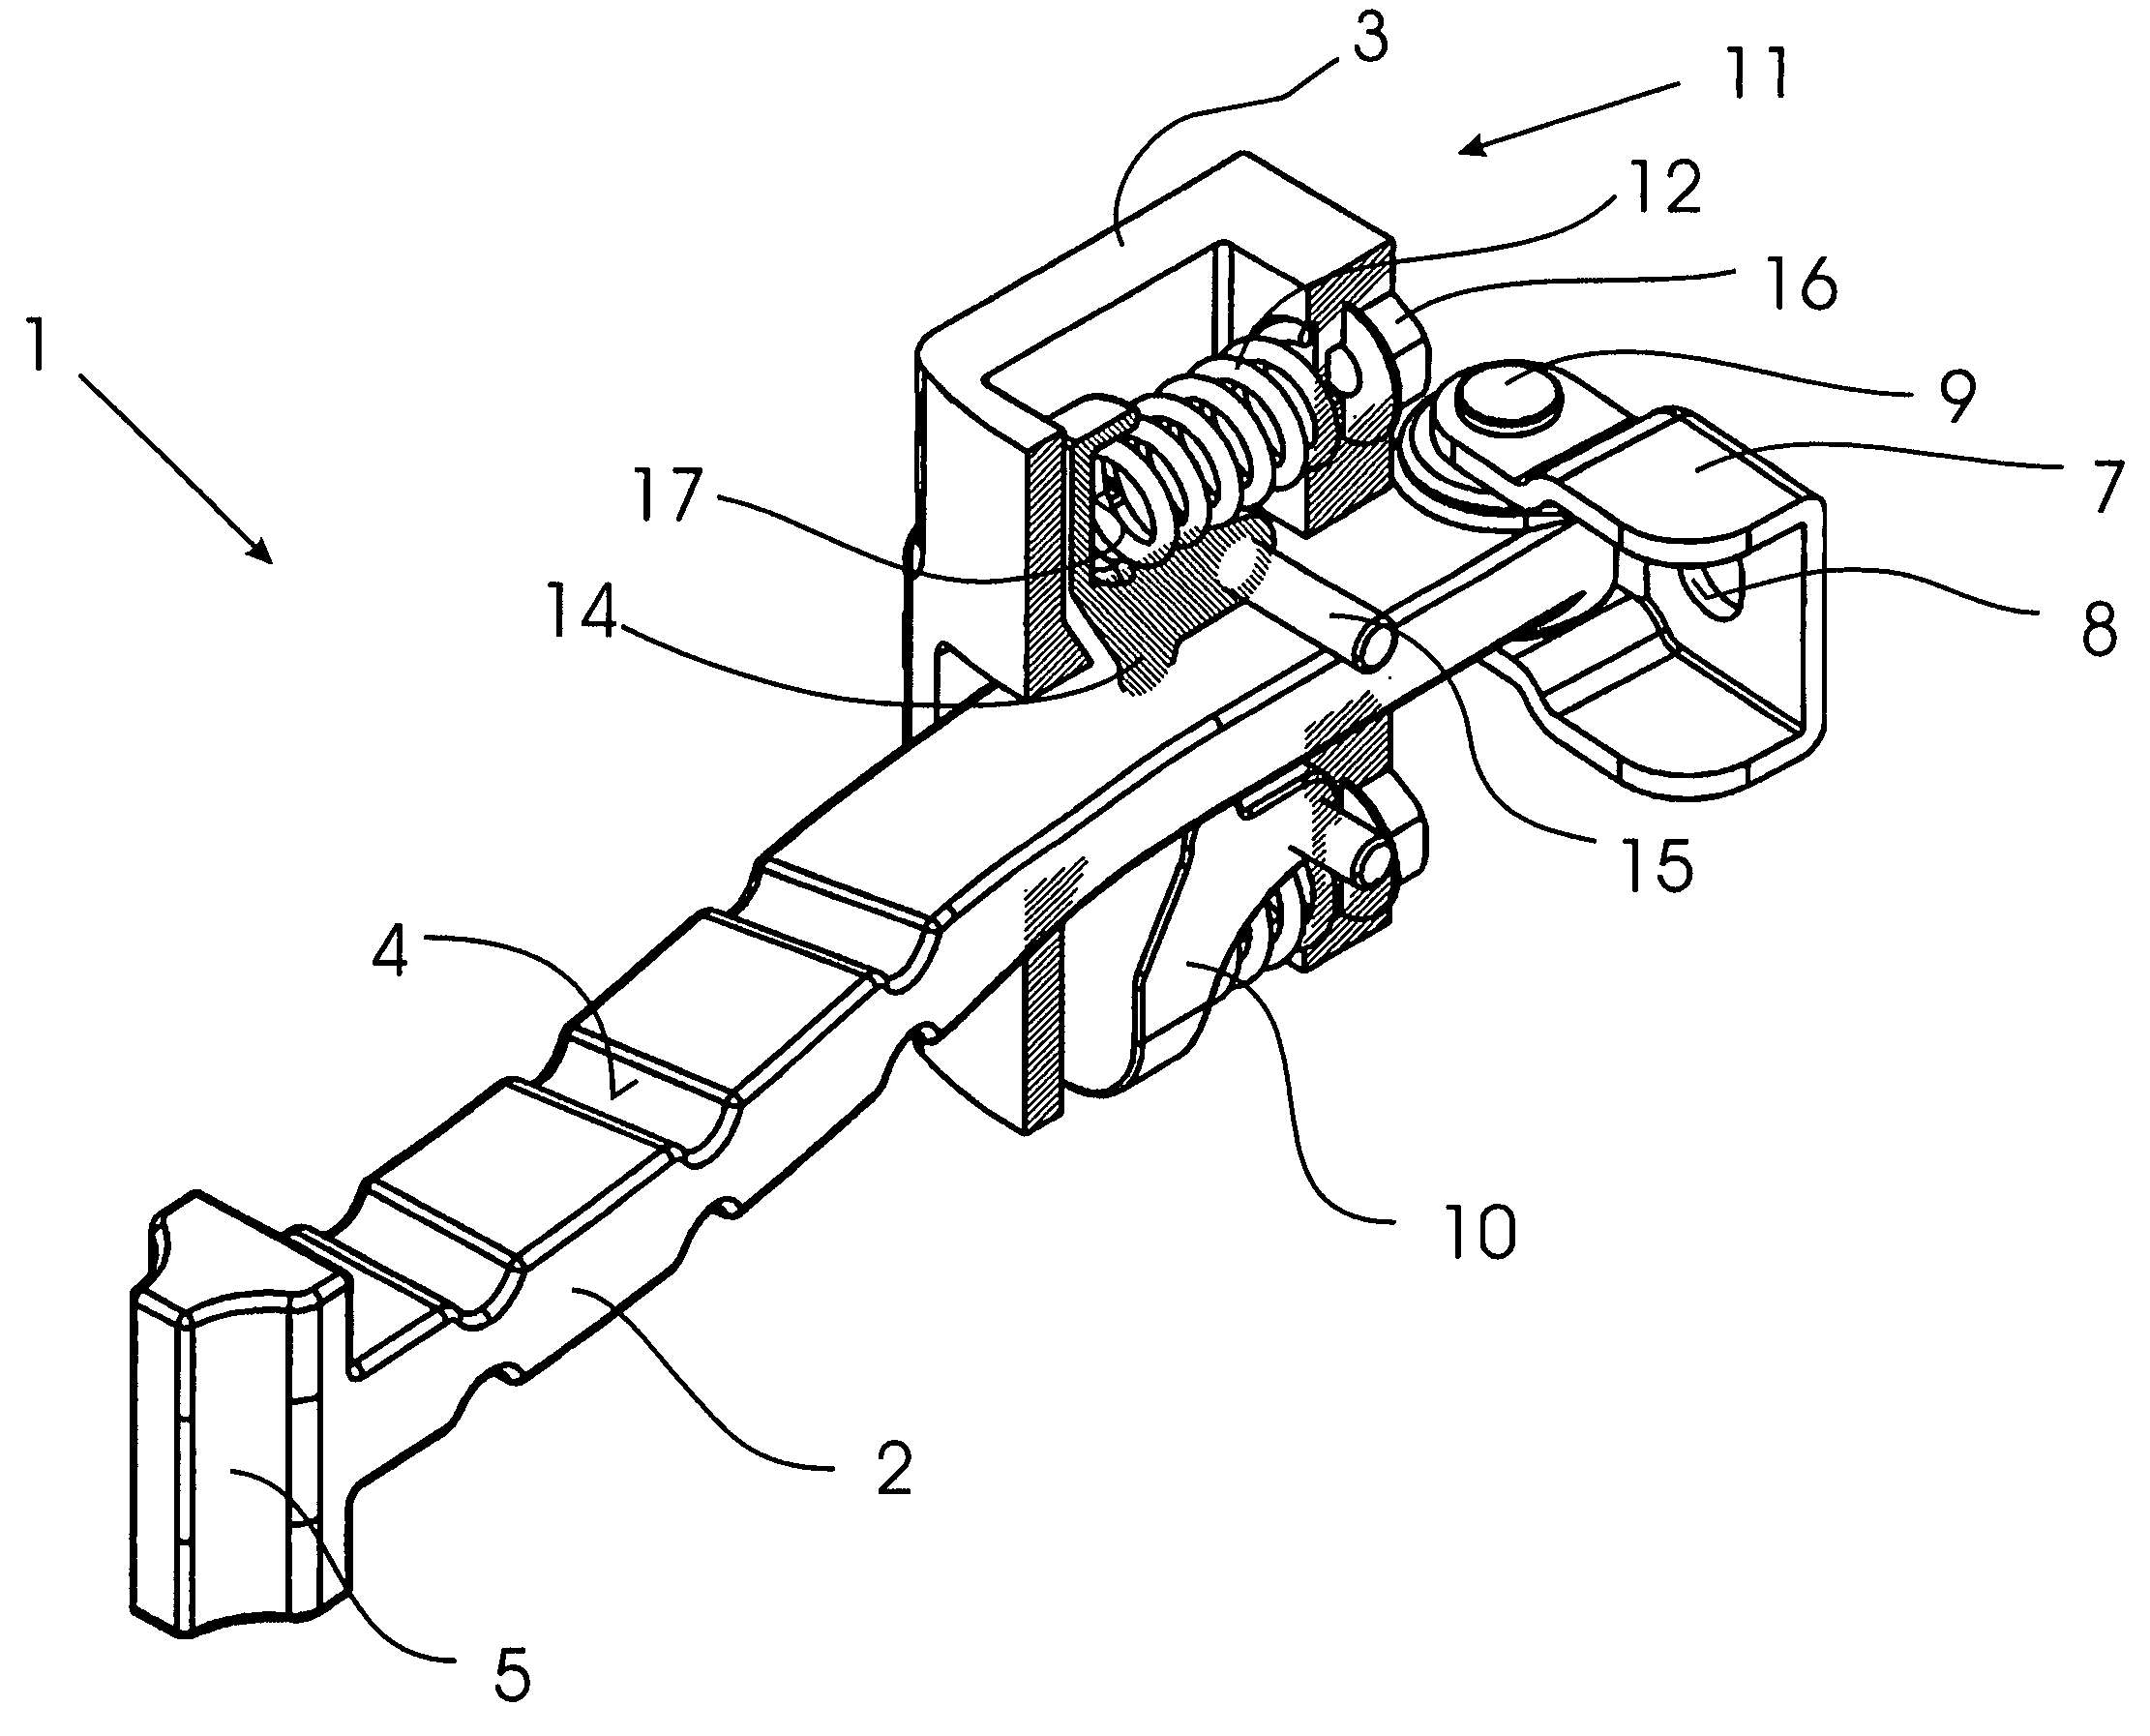 Door-stopping device for motor vehicles